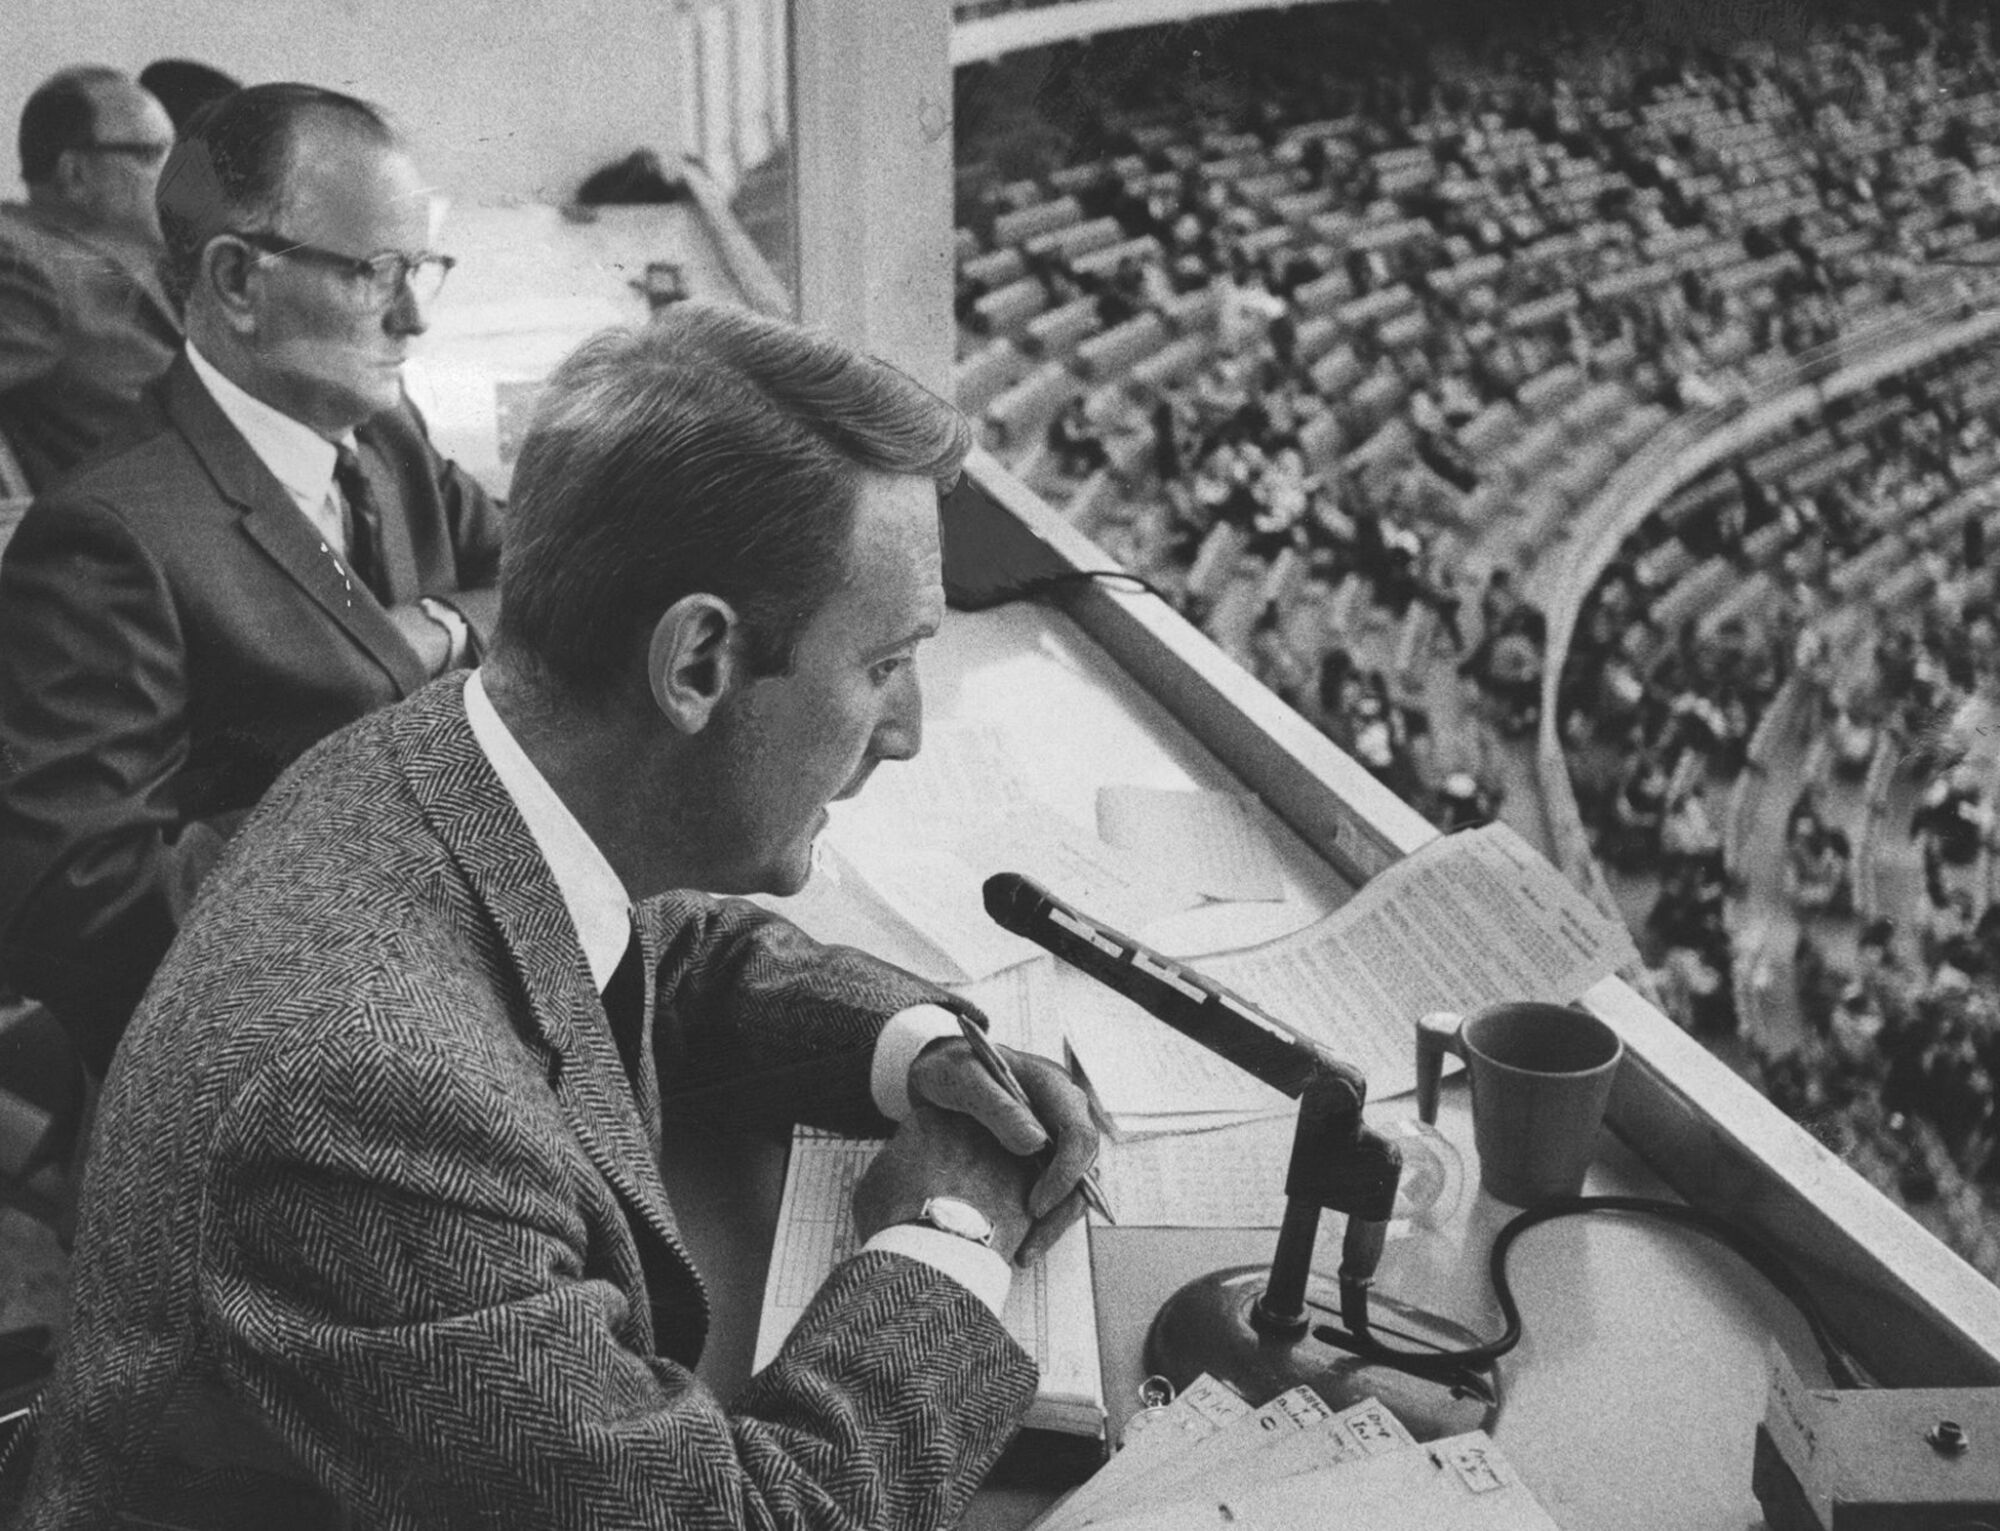 Vin Scully calls a game at Dodger Stadium in 1967 while sitting alongside broadcaster Jerry Doggett.